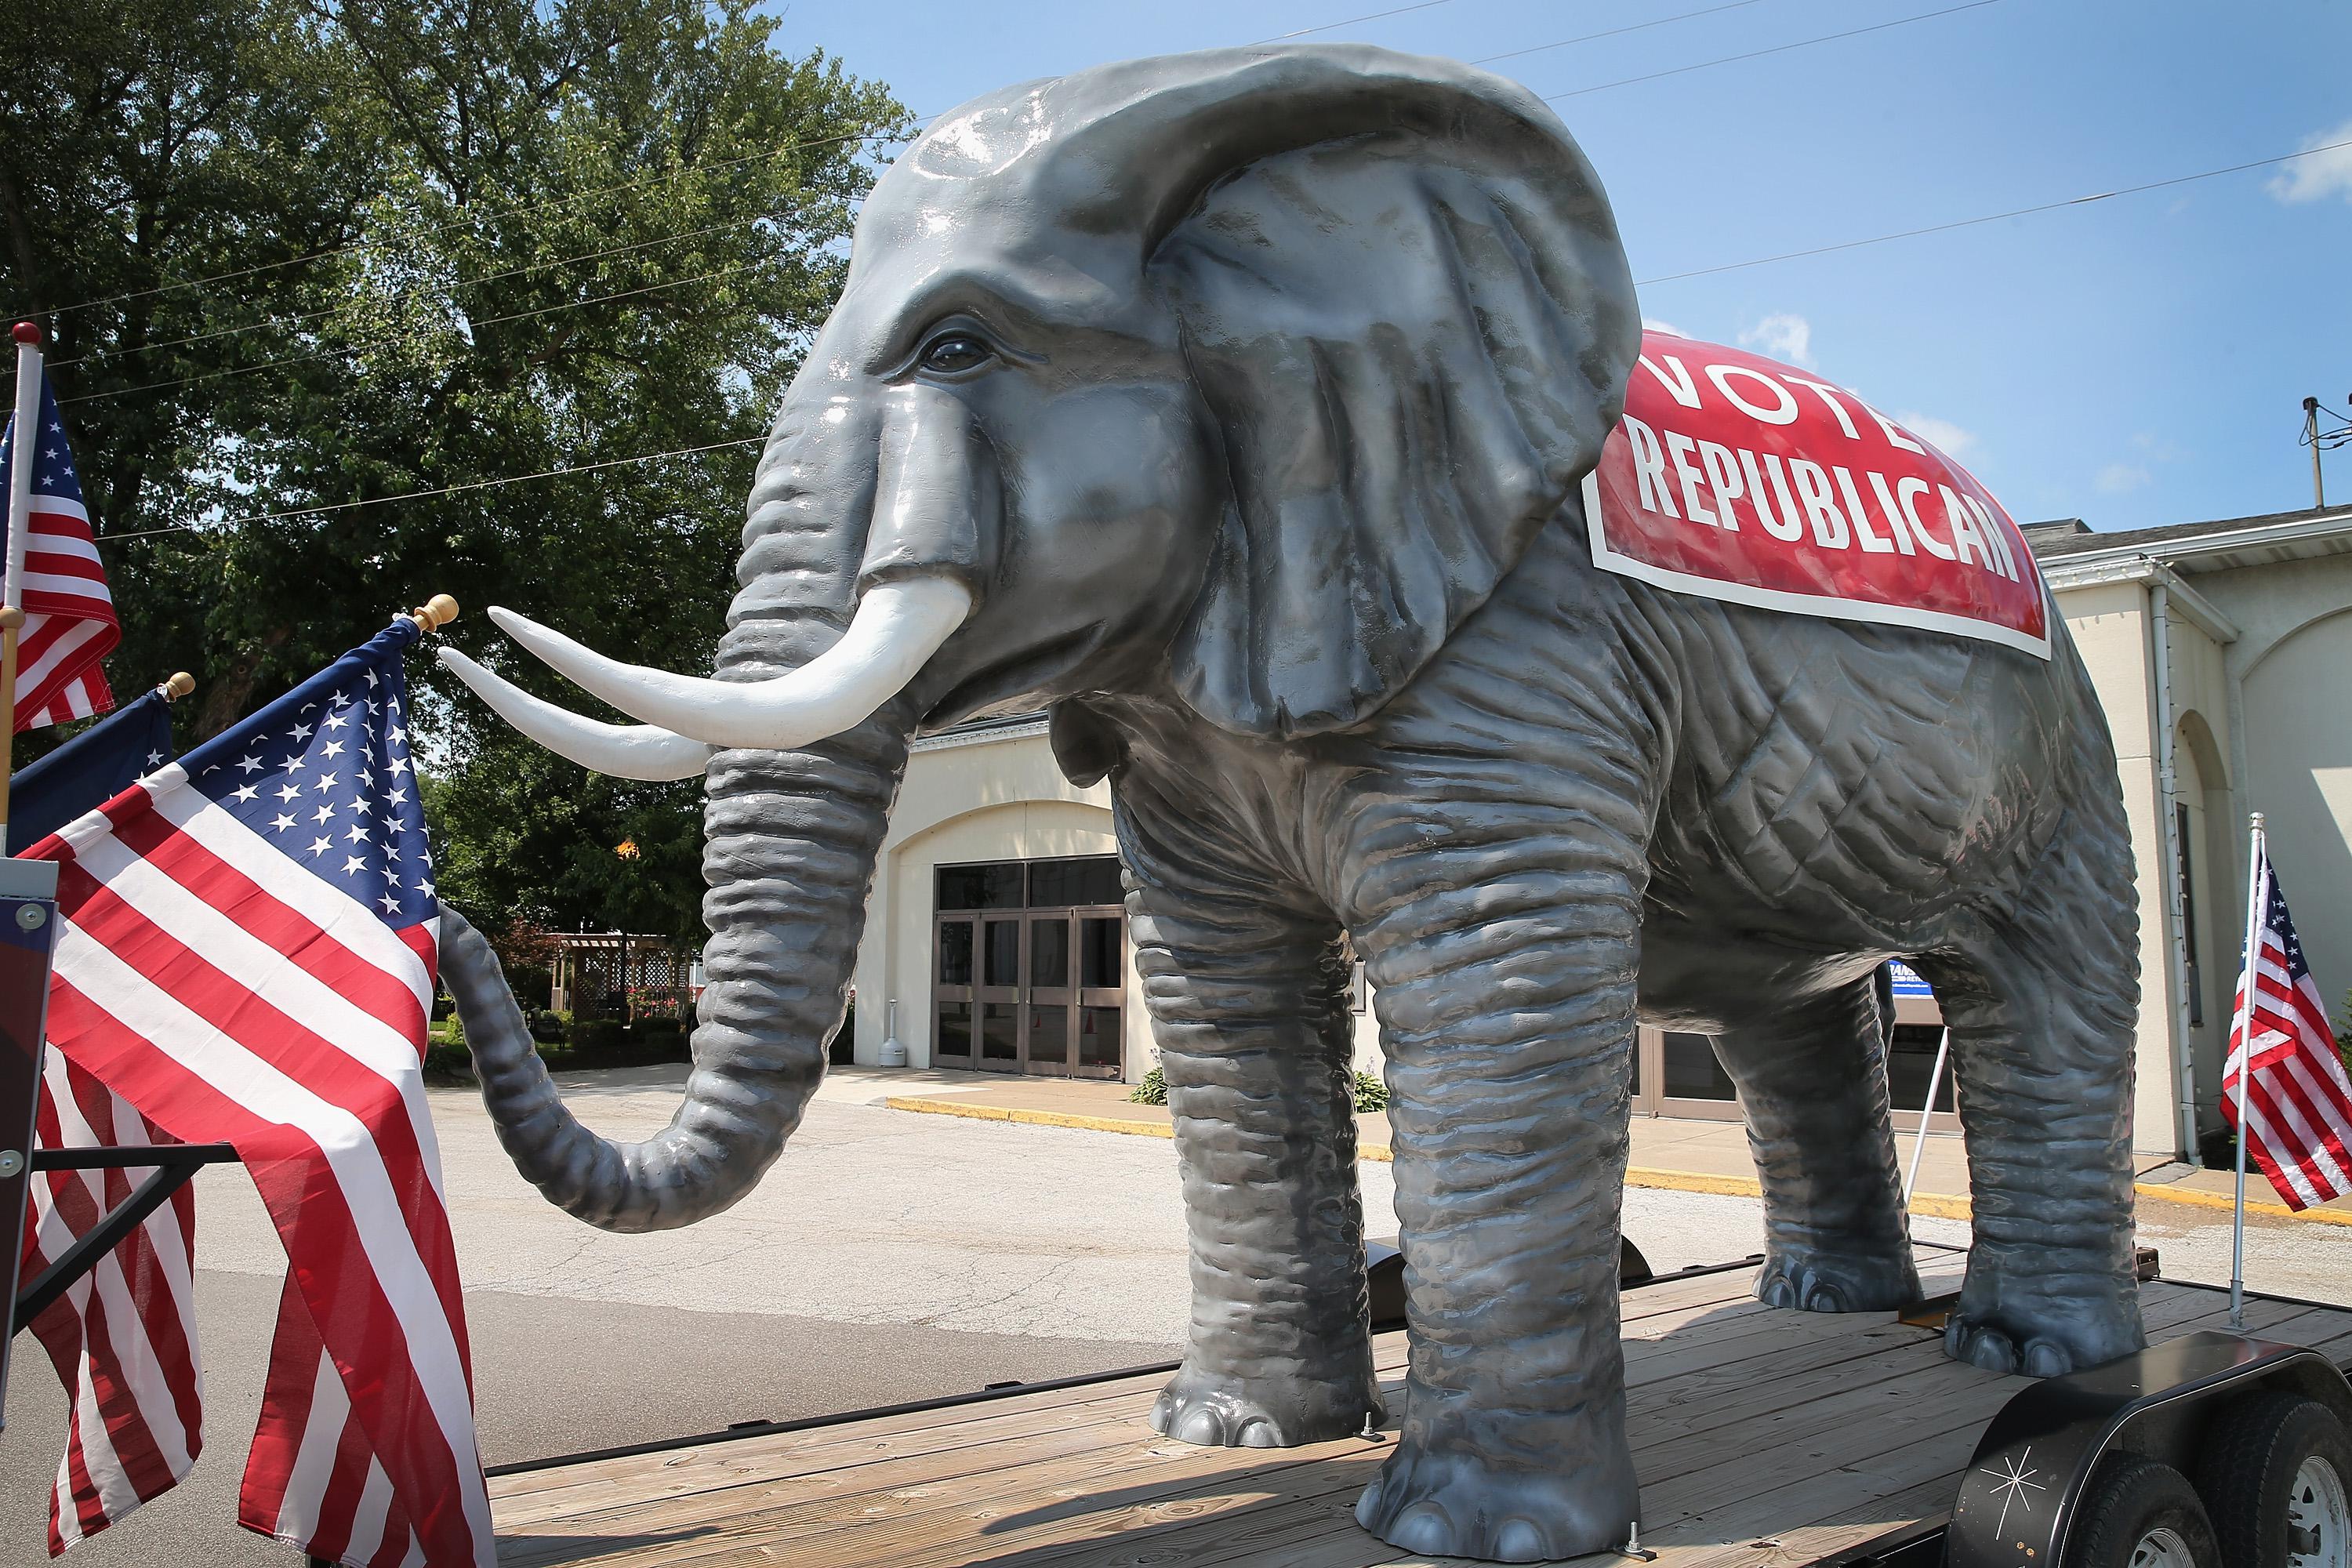 A Republican elephant prop at The Mississippi Valley Fairgrounds on July 17, 2014 in Davenport, Iowa. 